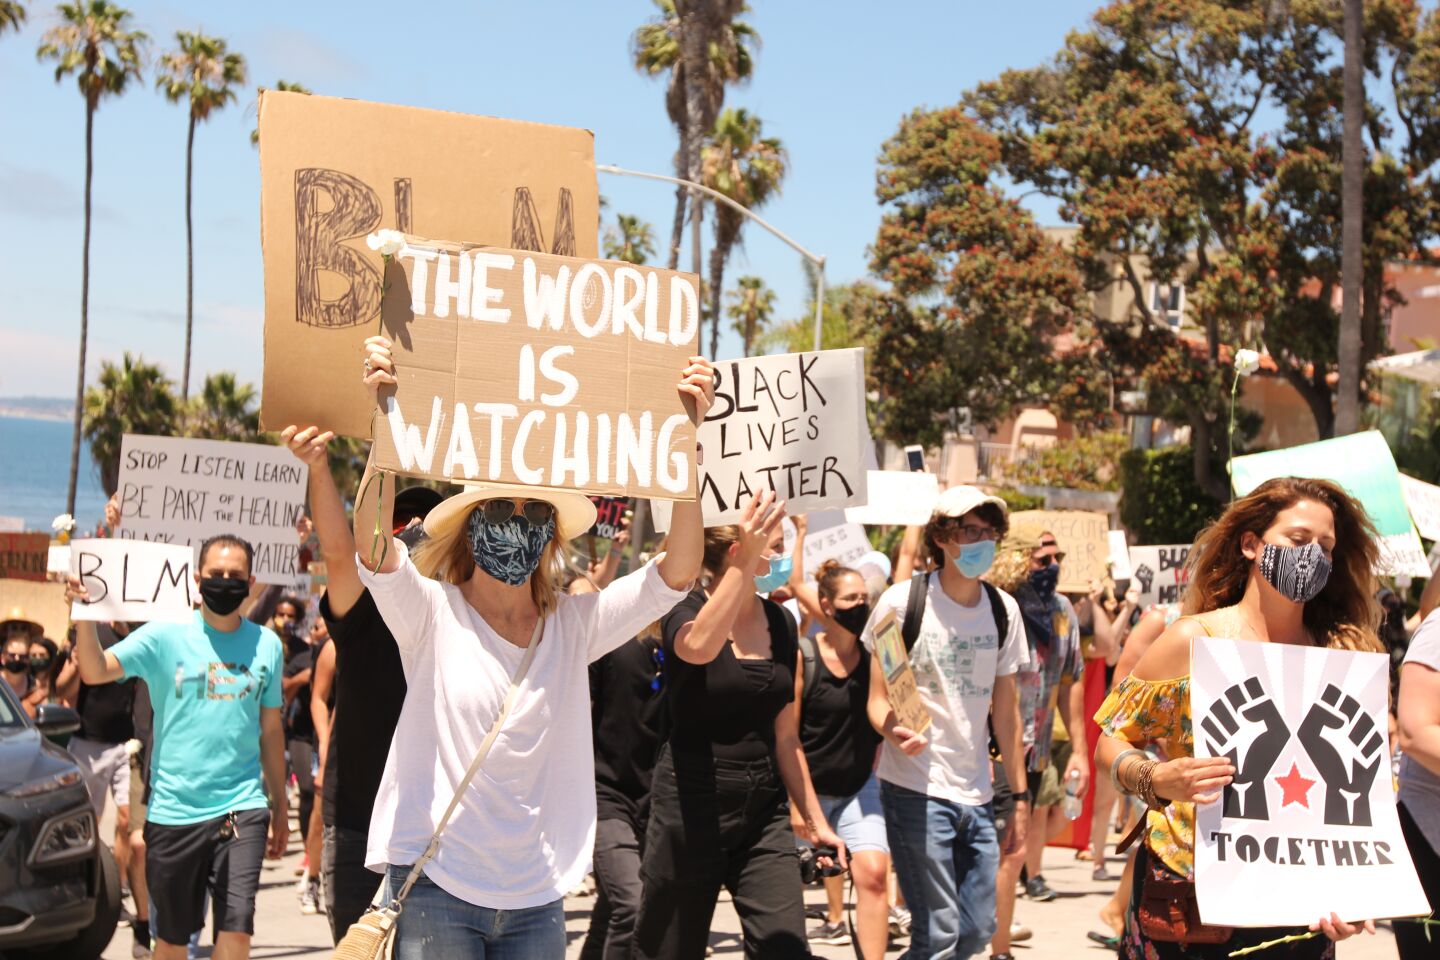 Demonstrators take to the streets at Scripps Park in La Jolla at the onset of a Black Lives Matter march June 12.